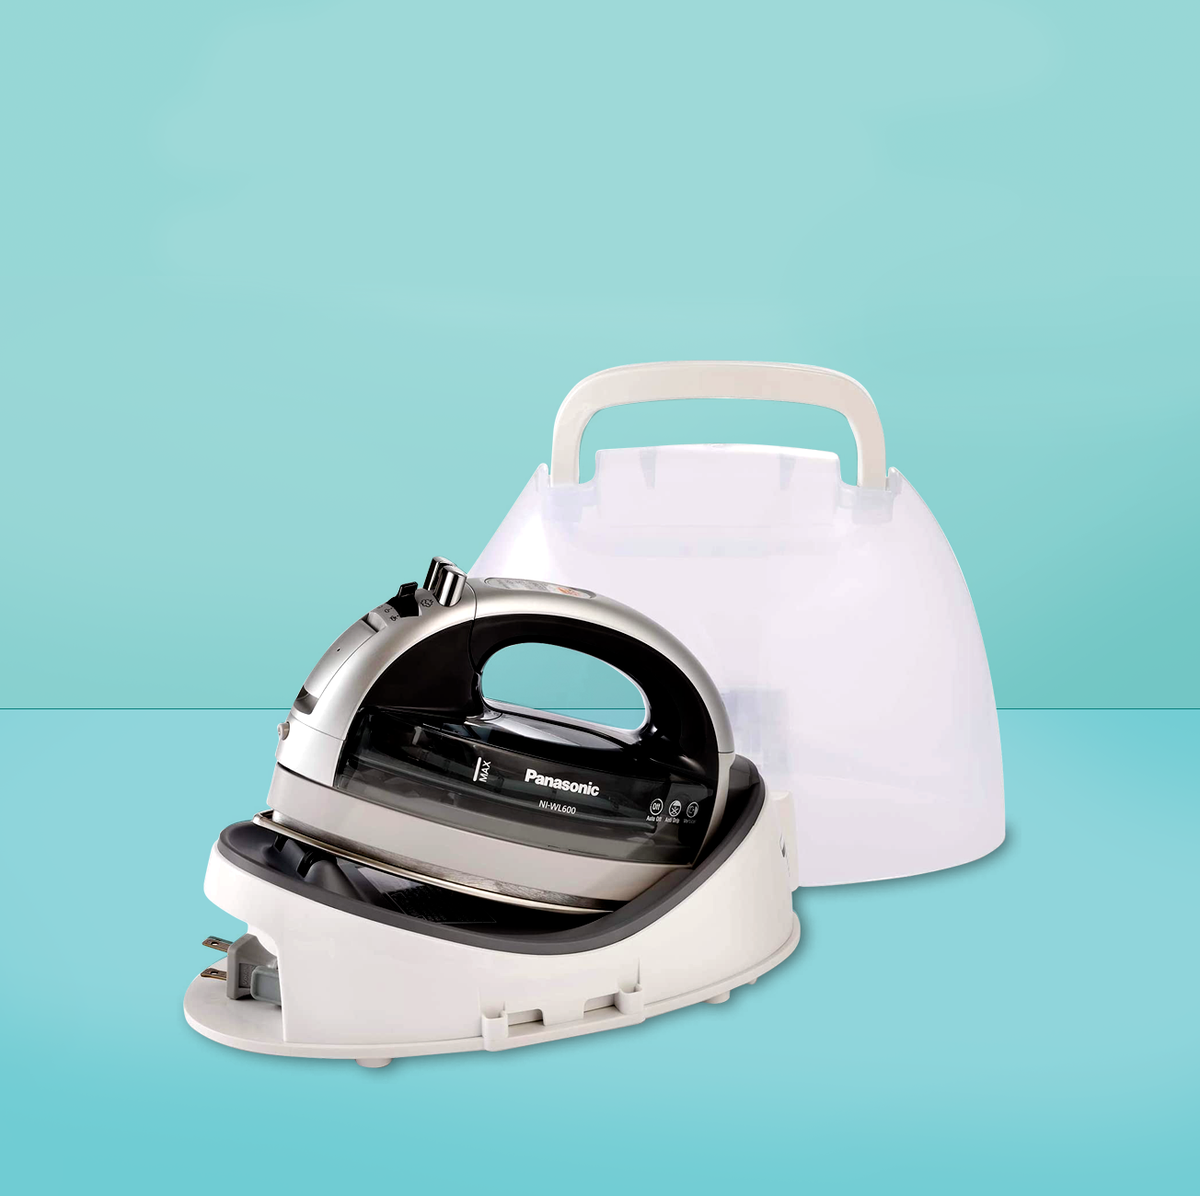 https://hips.hearstapps.com/hmg-prod/images/gh-101320-cordless-iron-1602599900.png?crop=0.652xw:1.00xh;0.175xw,0&resize=1200:*